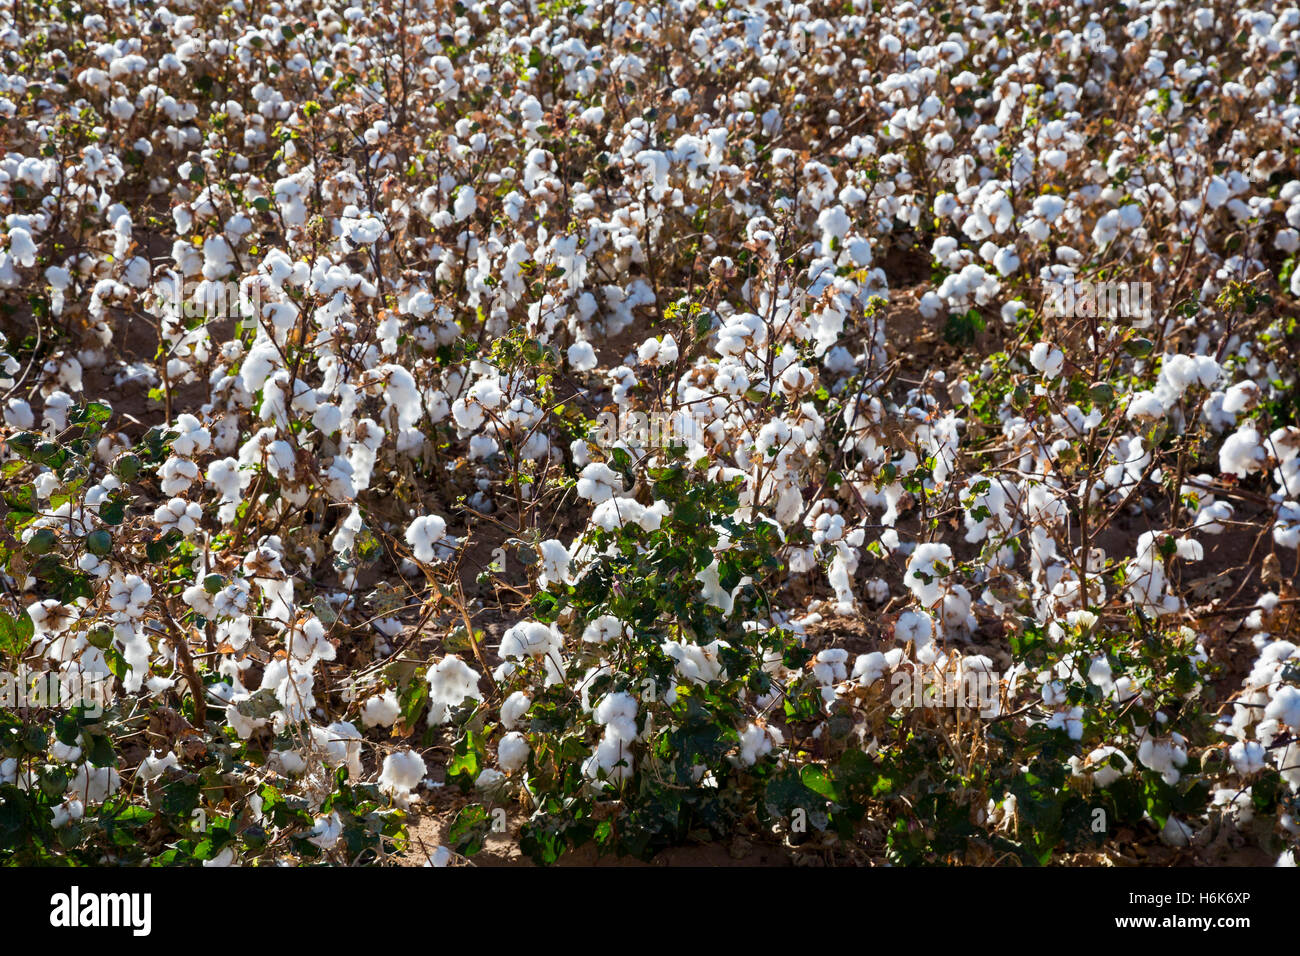 Eloy, Arizona - An irrigated cotton crop growing on a farm in the Sonoran Desert. Stock Photo